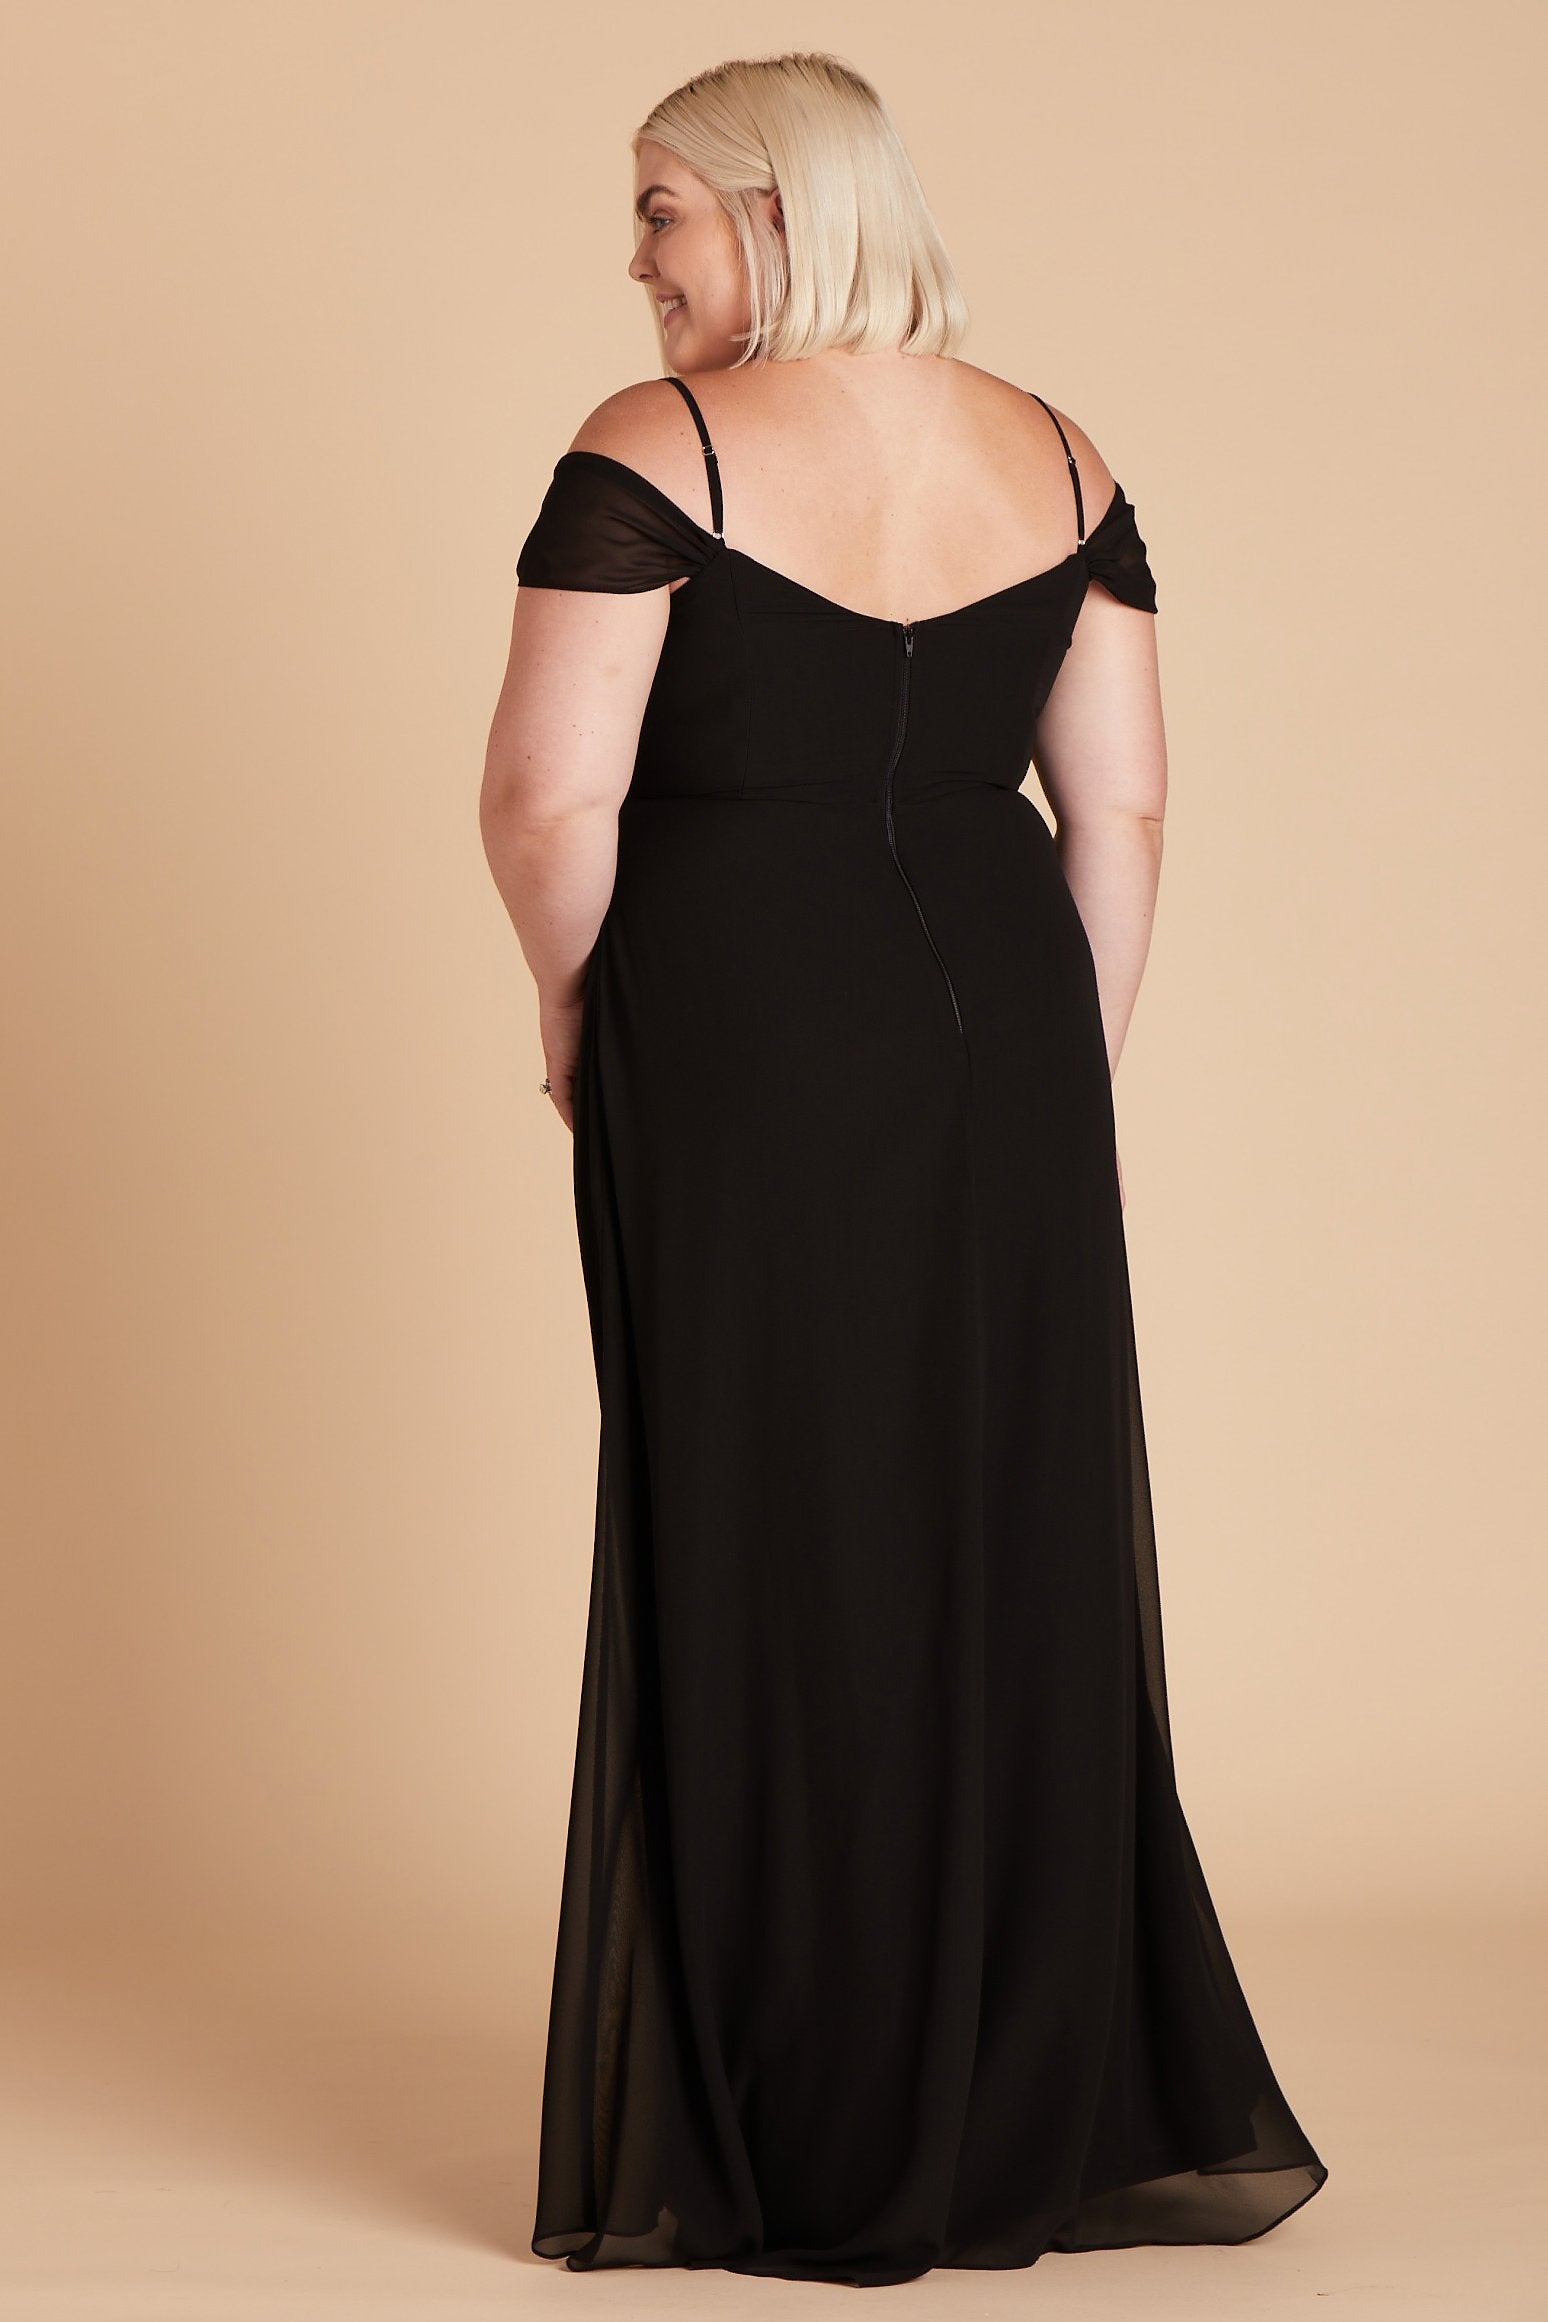 Spence convertible plus size bridesmaid dress in black chiffon by Birdy Grey, back view